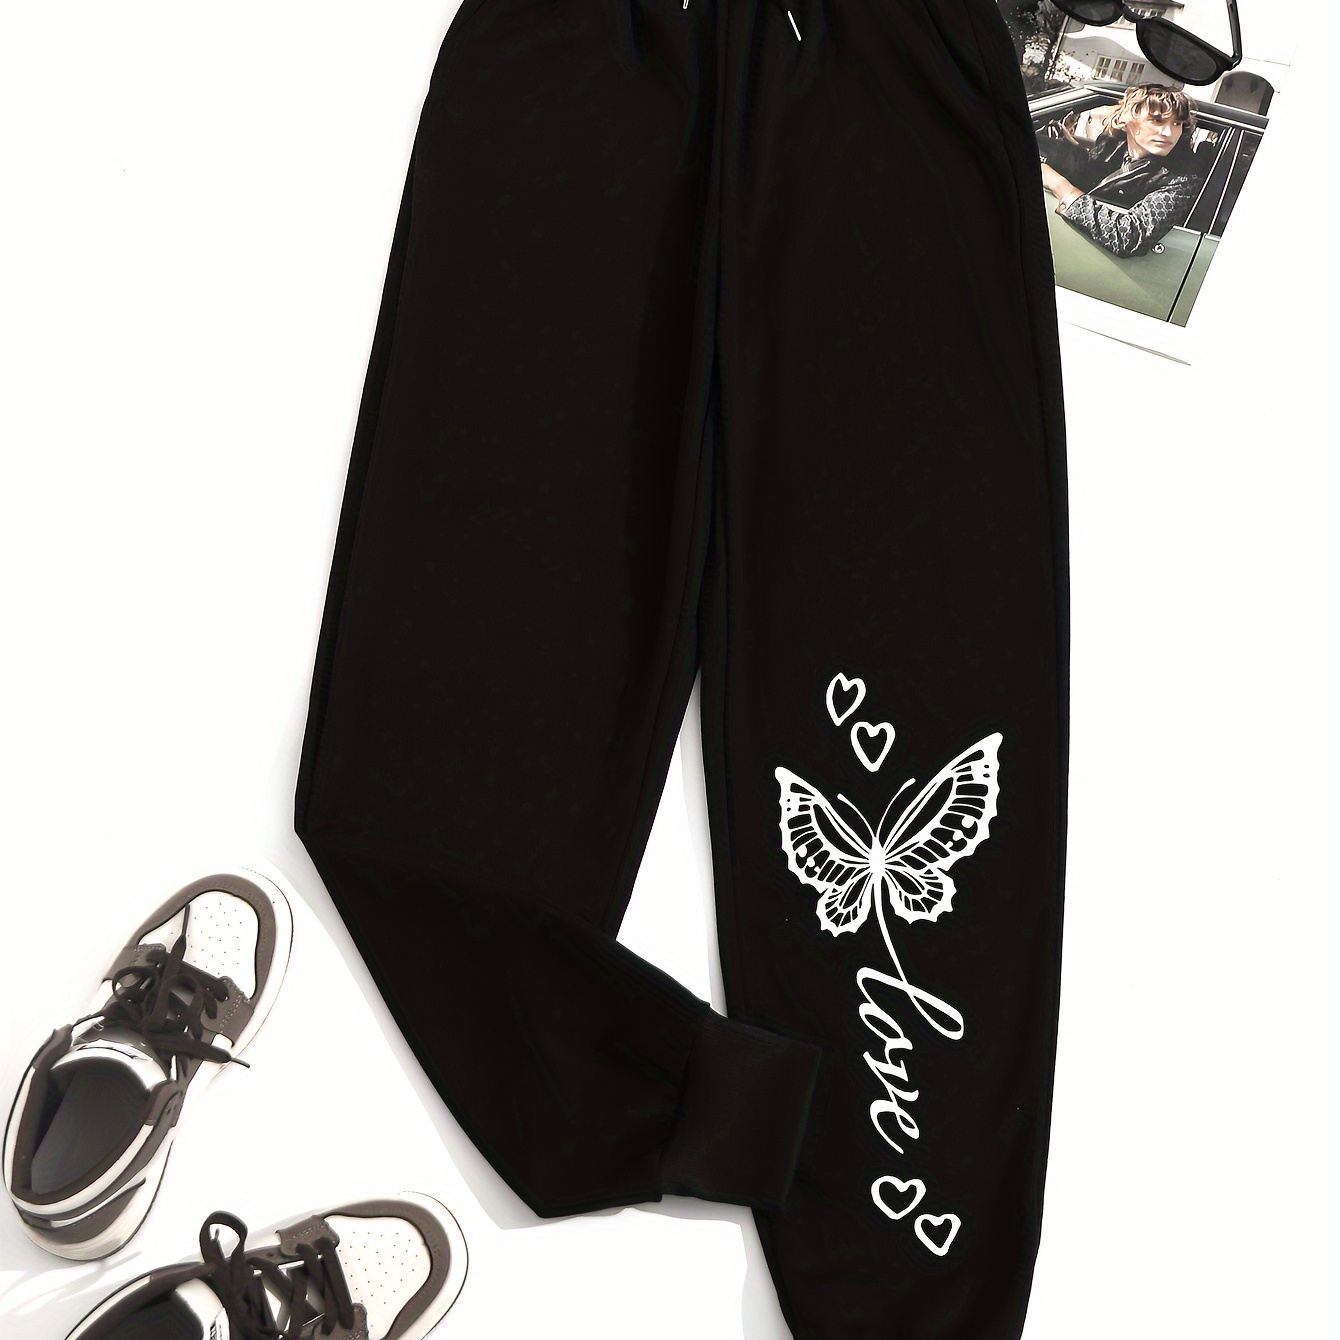 

Butterfly Print Elastic Sweatpants, Solid Drawstring High Waist Sweatpants, Casual Every Day Pants, Women's Clothing